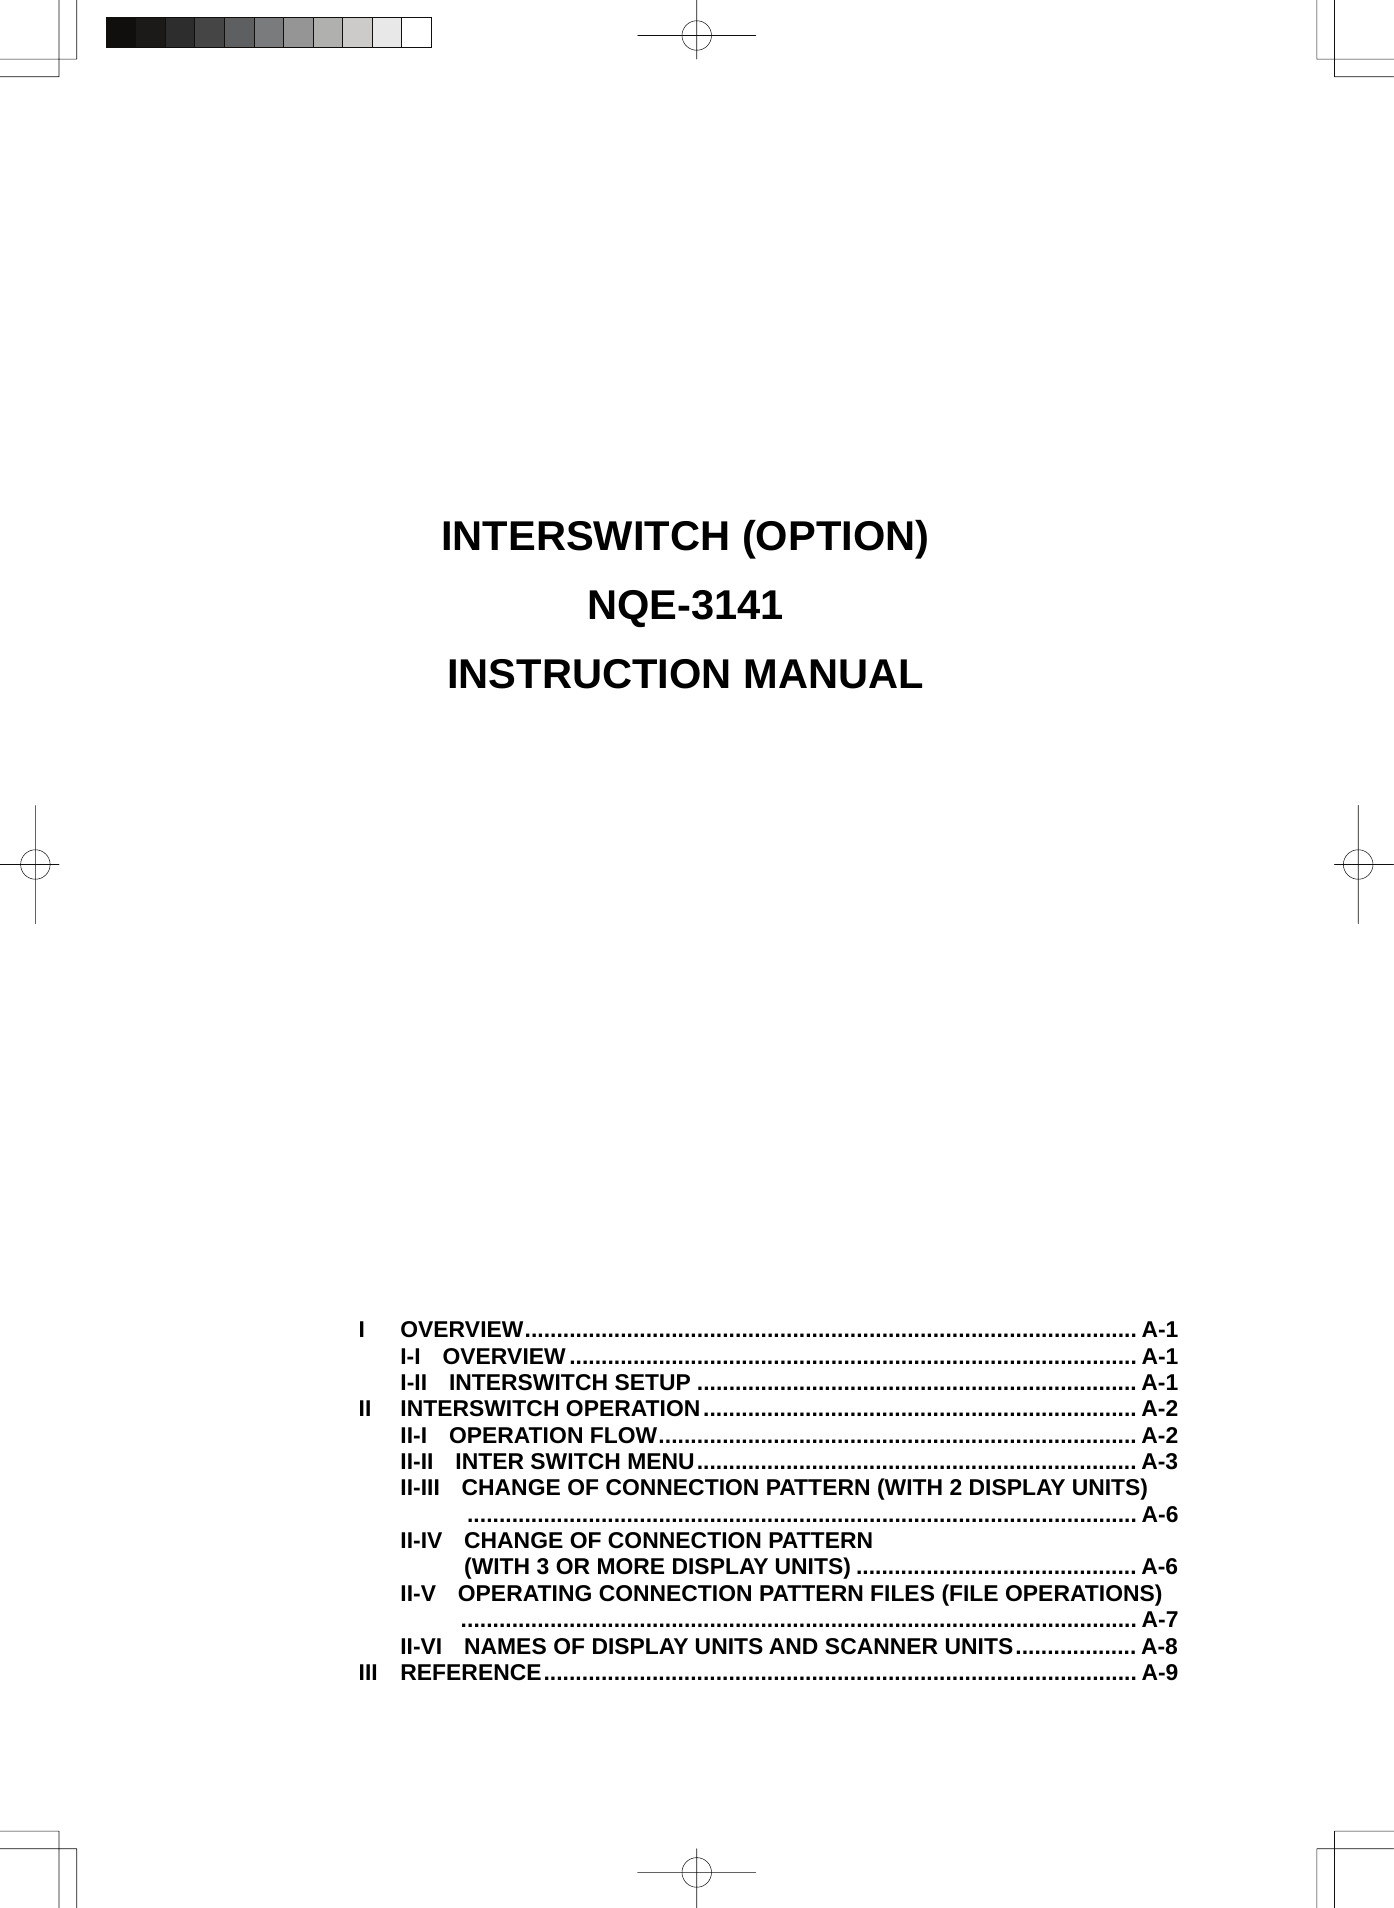               INTERSWITCH (OPTION) NQE-3141 INSTRUCTION MANUAL                          I OVERVIEW................................................................................................ A-1 I-I OVERVIEW......................................................................................... A-1 I-II INTERSWITCH SETUP ..................................................................... A-1 II INTERSWITCH OPERATION.................................................................... A-2 II-I OPERATION FLOW........................................................................... A-2 II-II INTER SWITCH MENU..................................................................... A-3 II-III CHANGE OF CONNECTION PATTERN (WITH 2 DISPLAY UNITS)  ......................................................................................................... A-6 II-IV CHANGE OF CONNECTION PATTERN     (WITH 3 OR MORE DISPLAY UNITS) ............................................ A-6 II-V OPERATING CONNECTION PATTERN FILES (FILE OPERATIONS)  .......................................................................................................... A-7 II-VI NAMES OF DISPLAY UNITS AND SCANNER UNITS................... A-8 III REFERENCE............................................................................................. A-9 